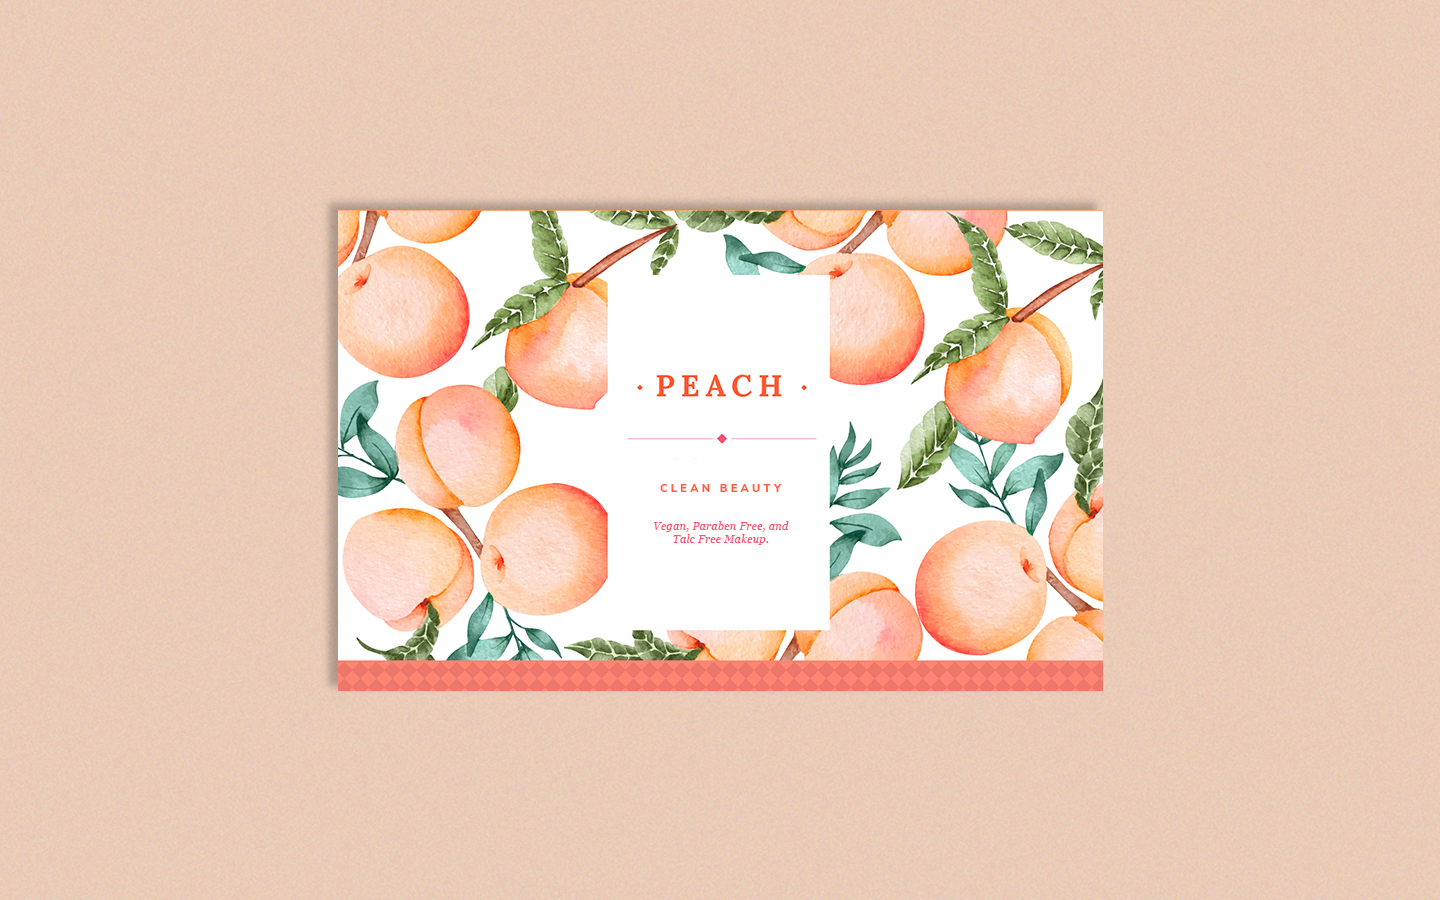 Build your custom branded beauty line with this year's Pantone color of the year, Peach Fuzz